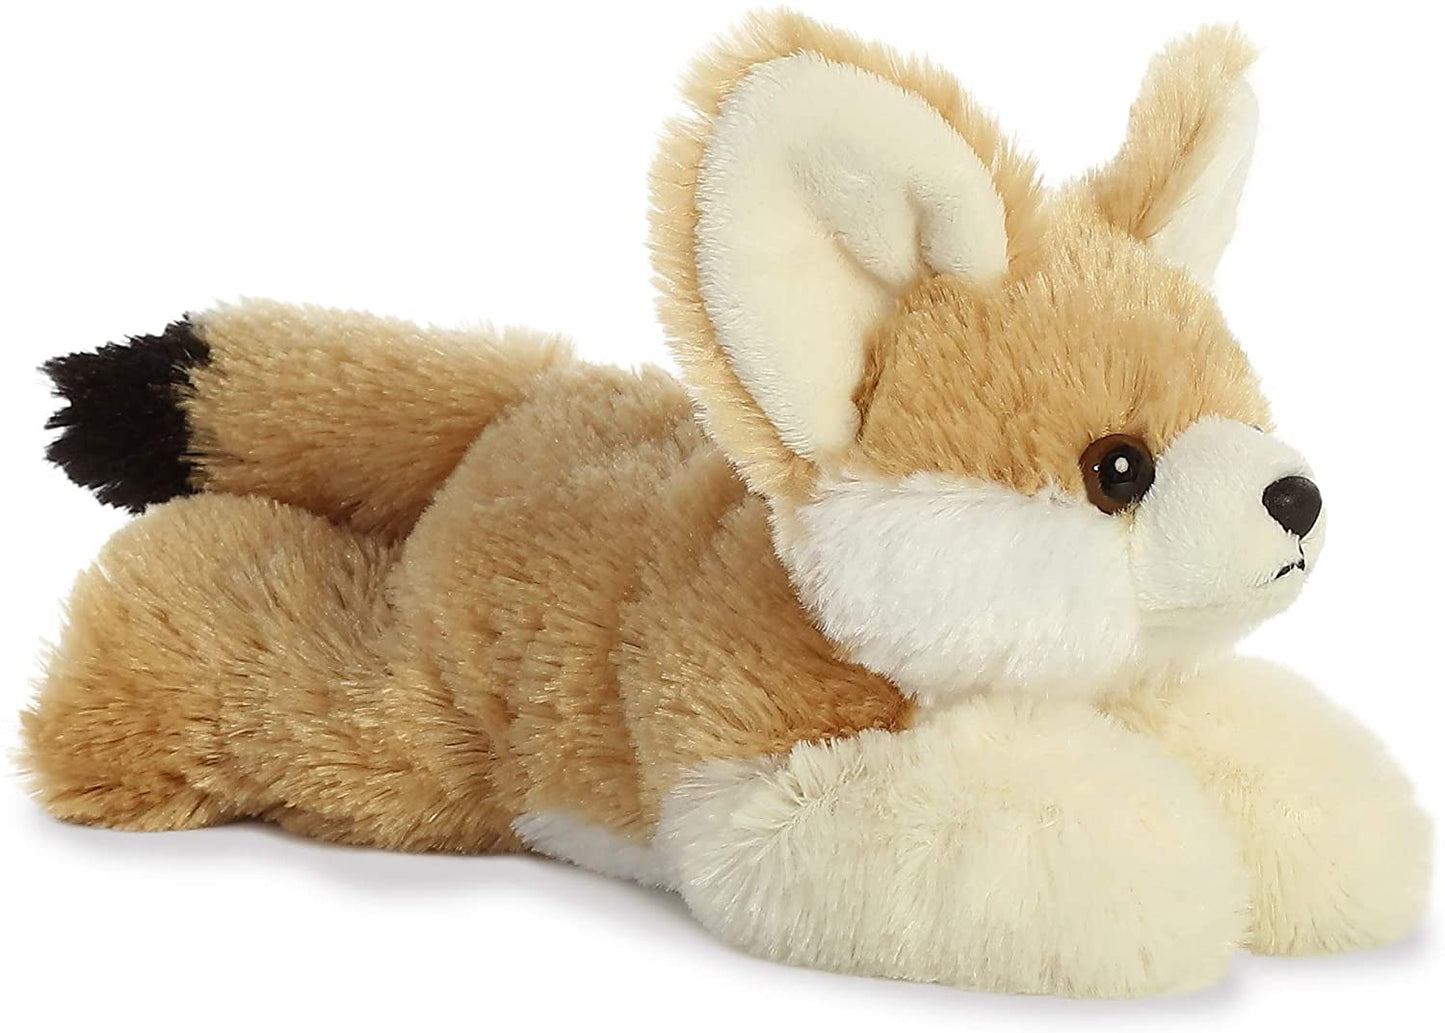 This Frisky Fennec Fox has large adorable ears and a tail with a black tip!